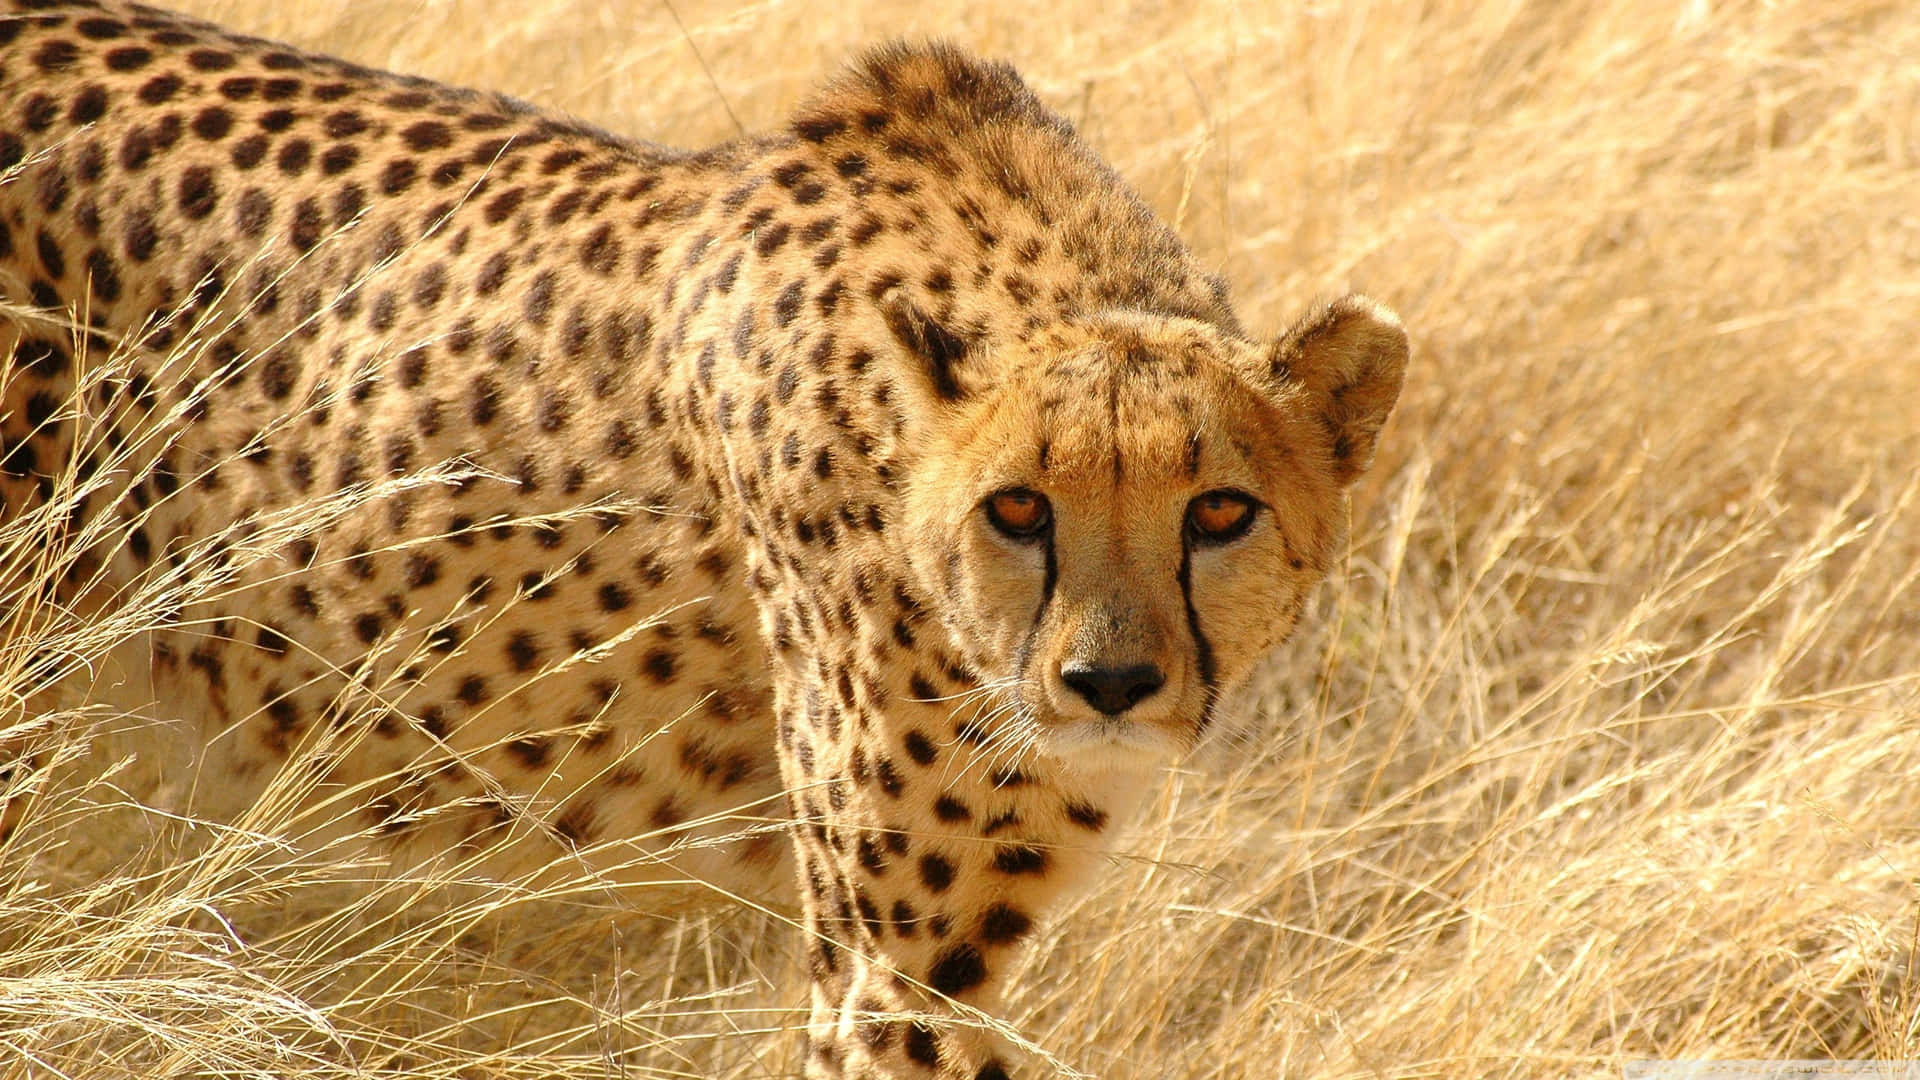 A portrait of a beautiful cheetah resting in the grass Wallpaper